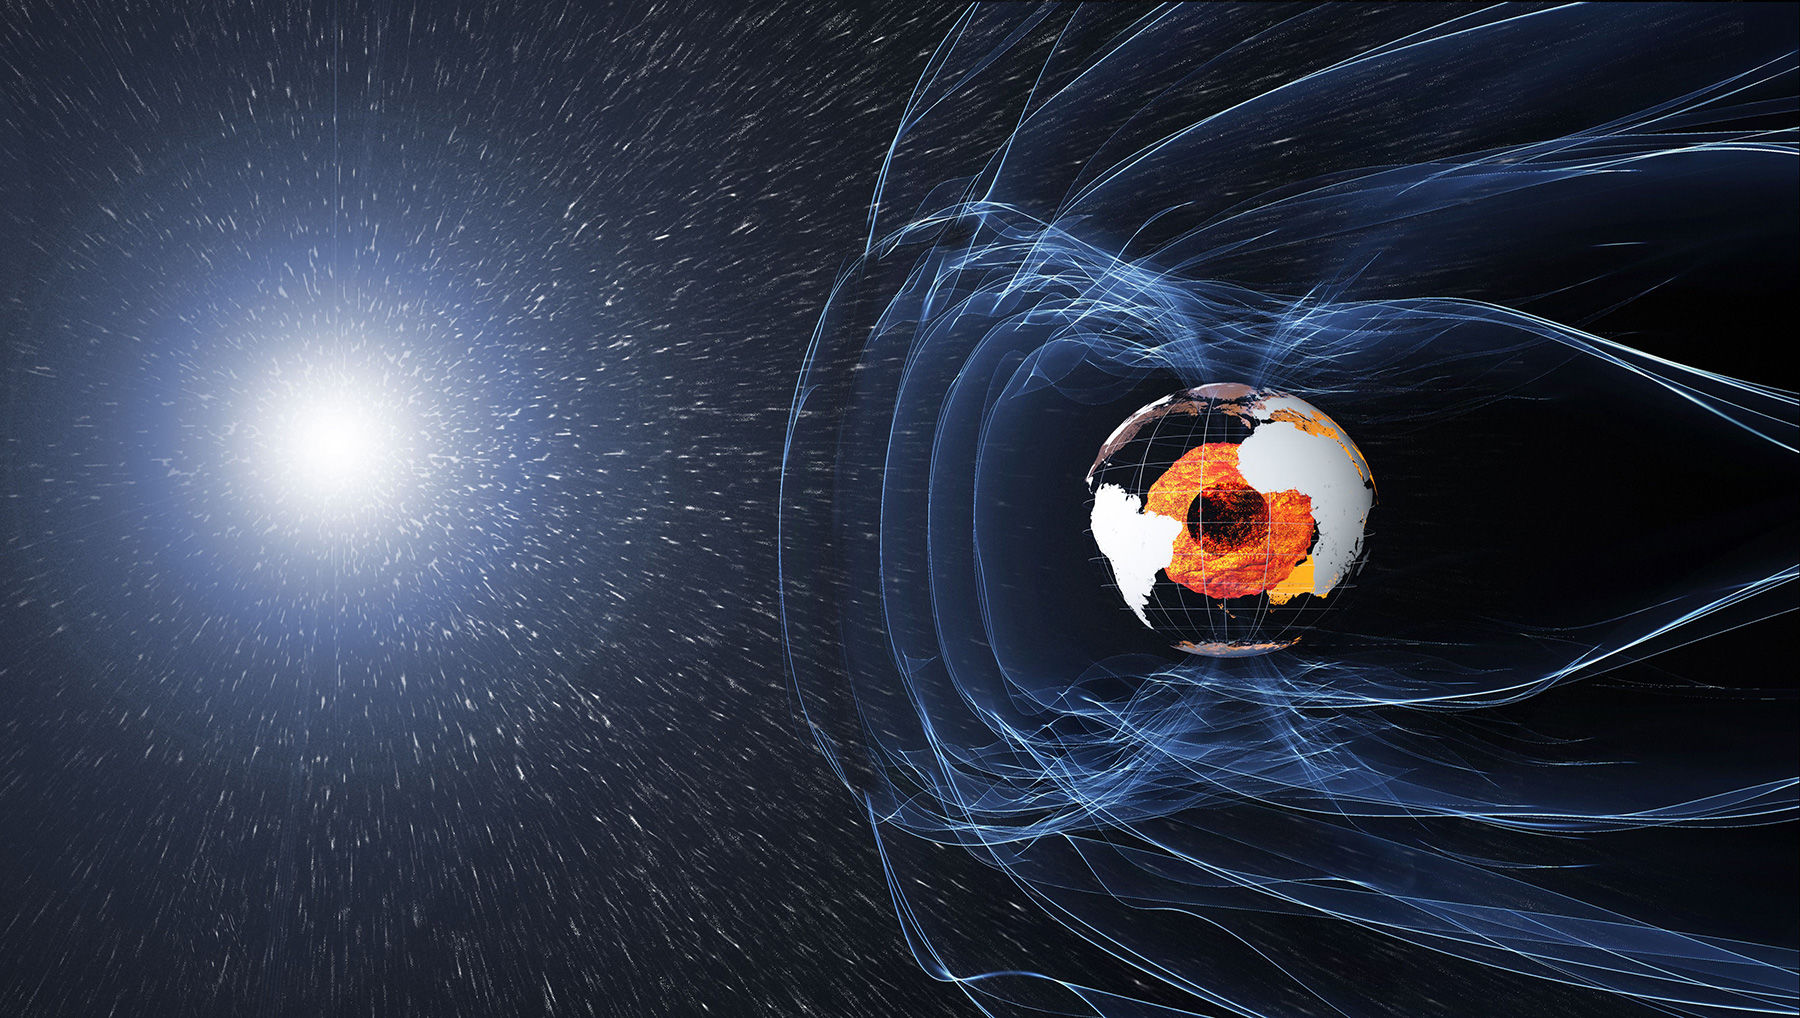 The Earth’s magnetic field acts like a shield, protecting us from subatomic particles from the Sun. Credit: ESA